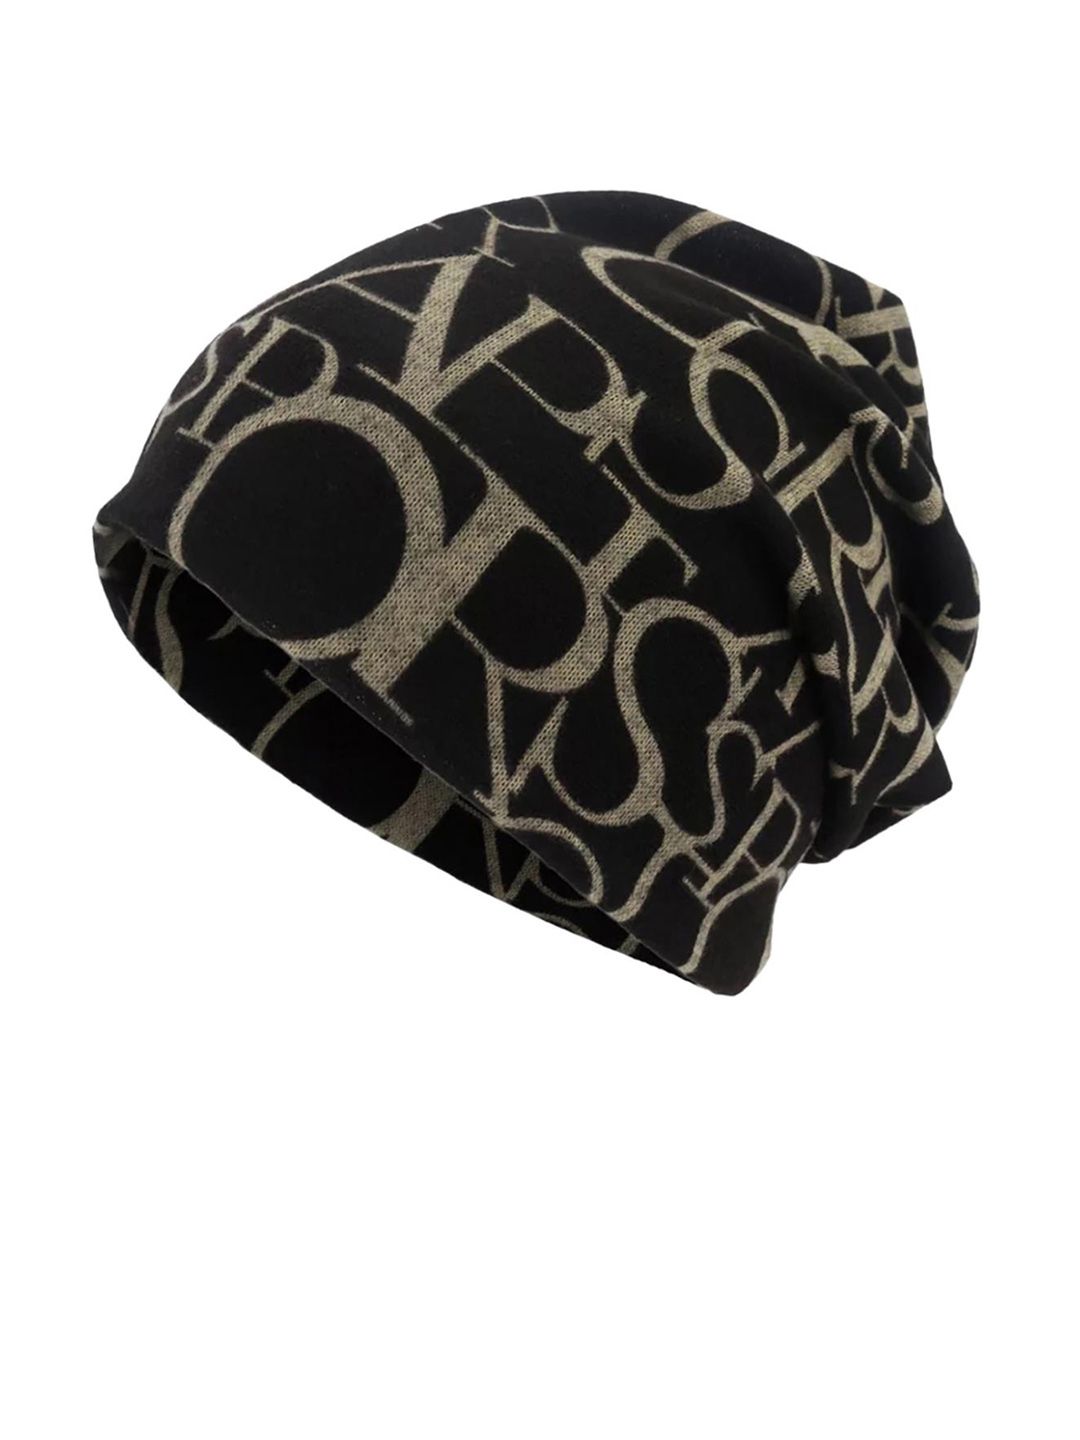 YOUSTYLO Unisex Black & Gold-Toned Printed Cotton Beanie Cap Price in India